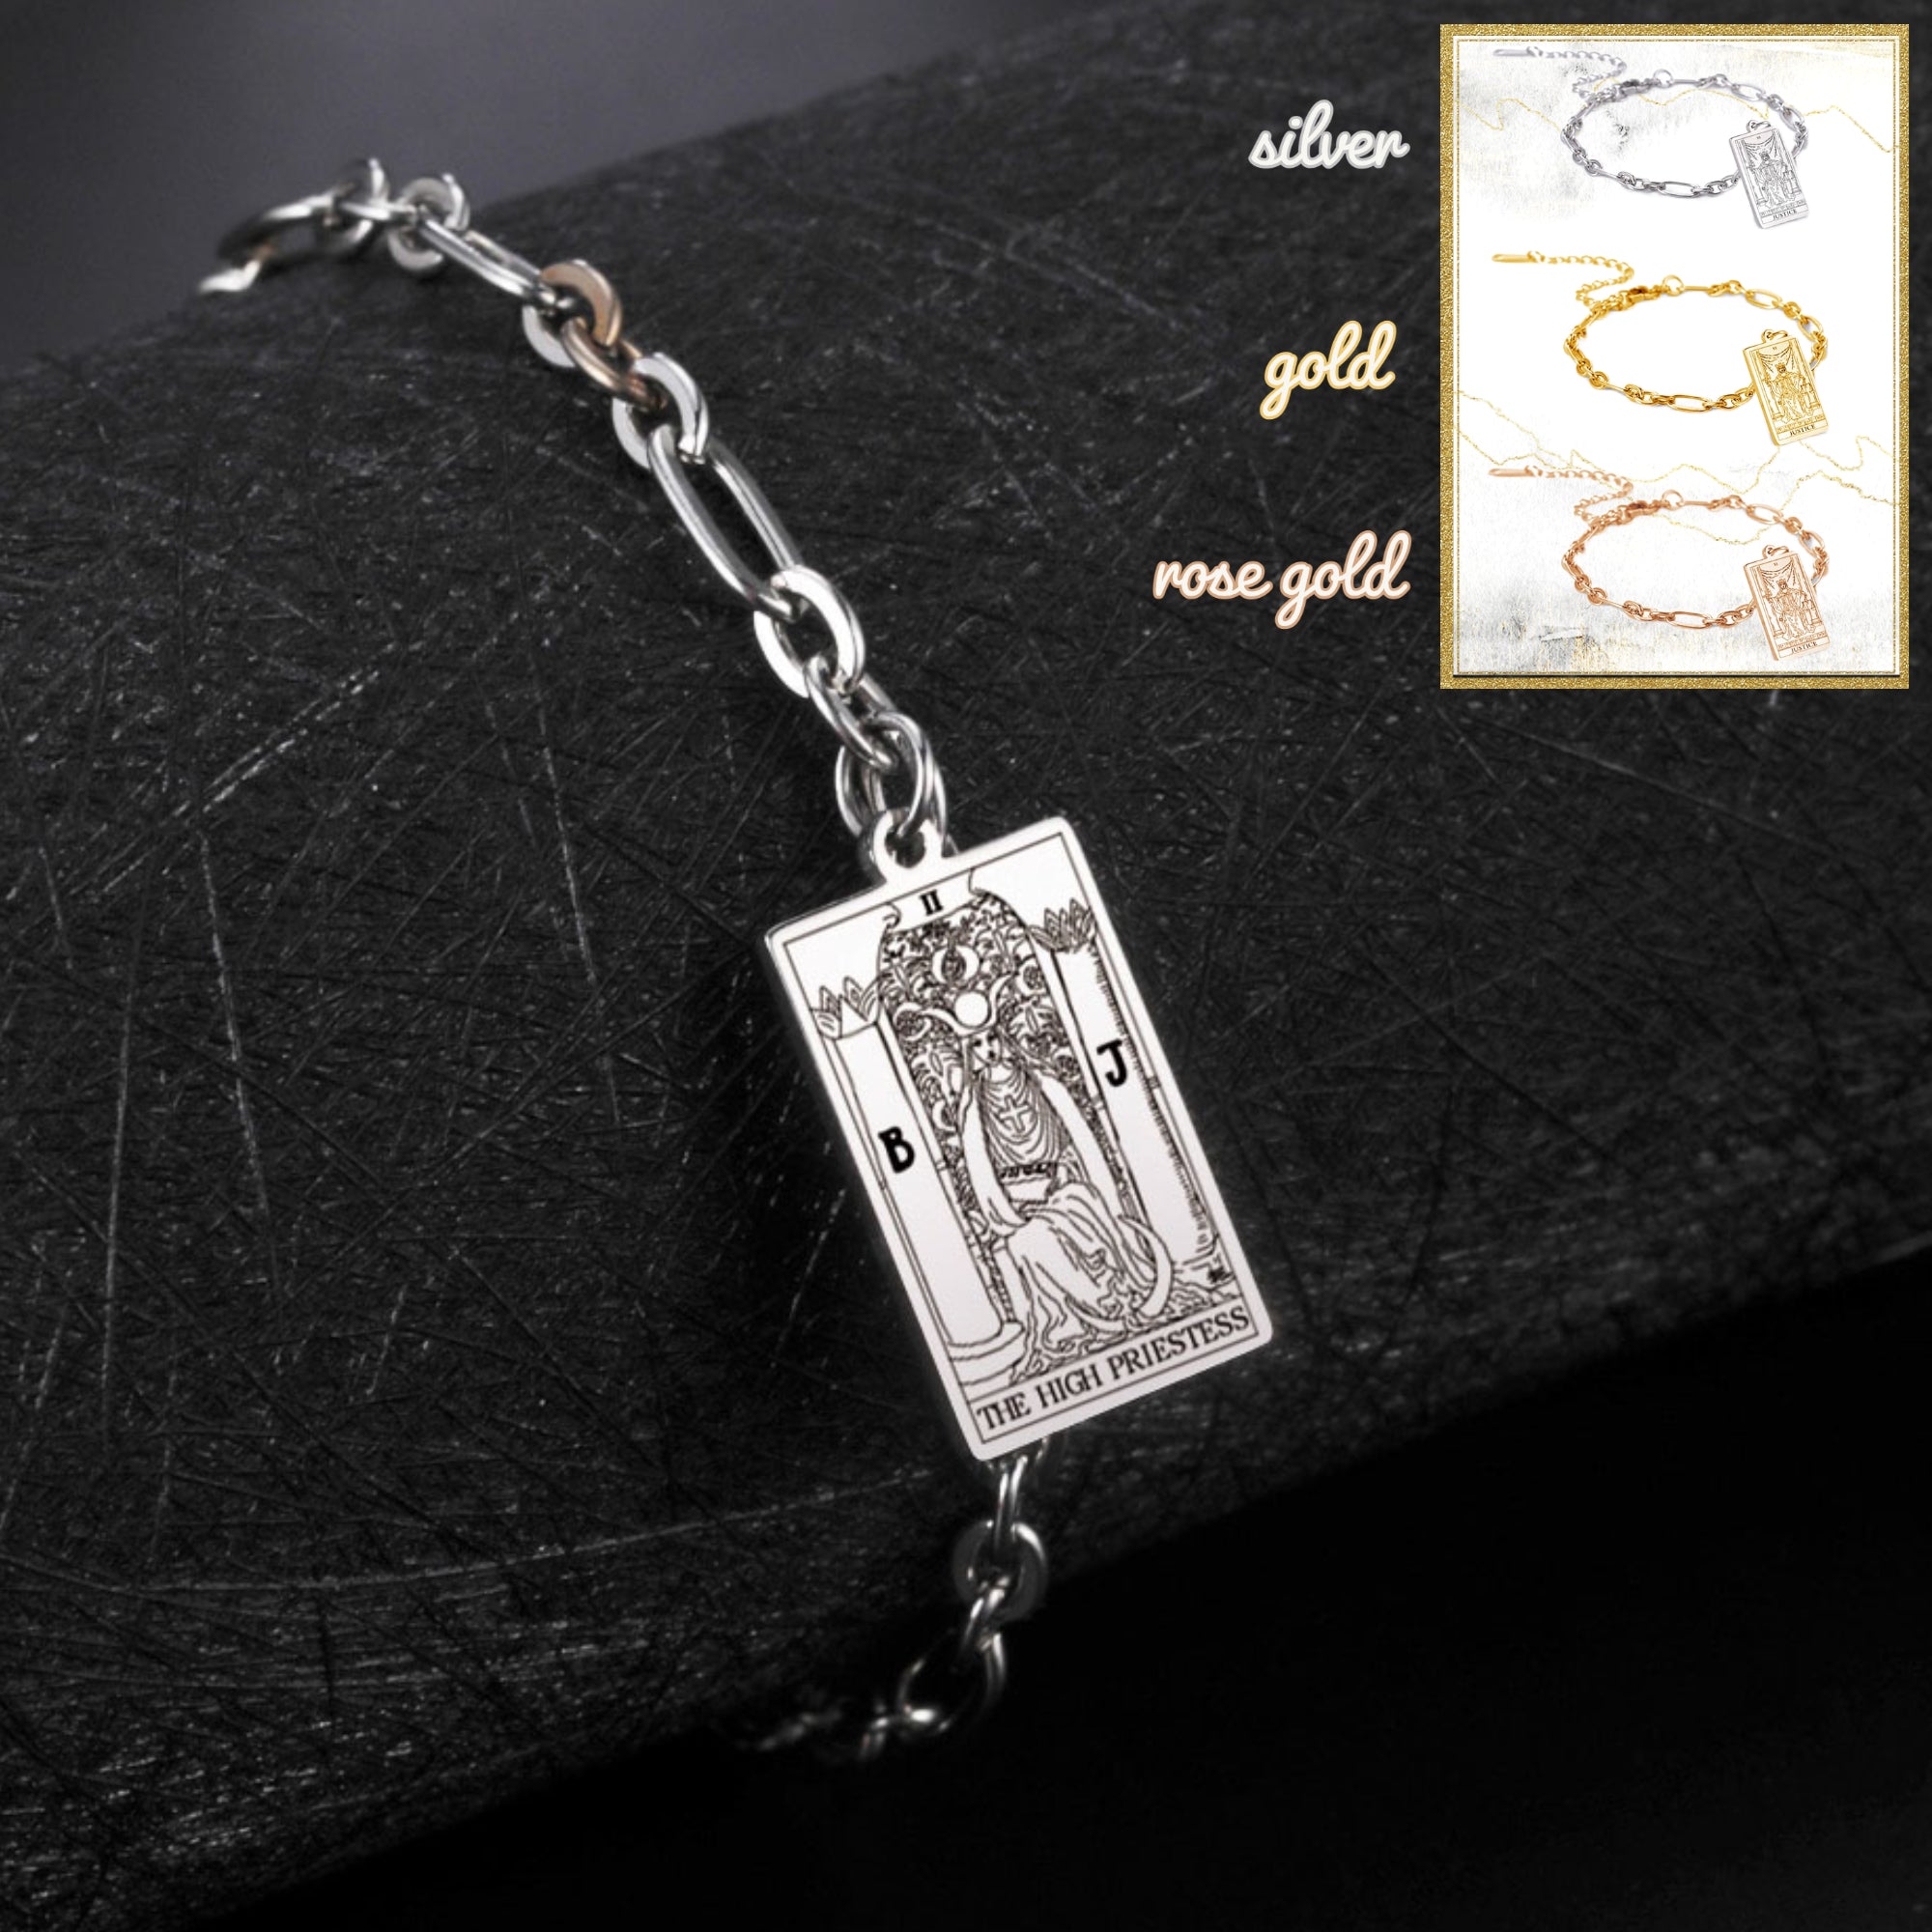 Bracelets With Tarot Card Charms, Stainless Steel Wrist Pendants Of All The 22 Rider-Waite-Smith Major Arcana Divination Cards, Esoteric Jewelry Gift For Spiritual Women | Apollo Tarot